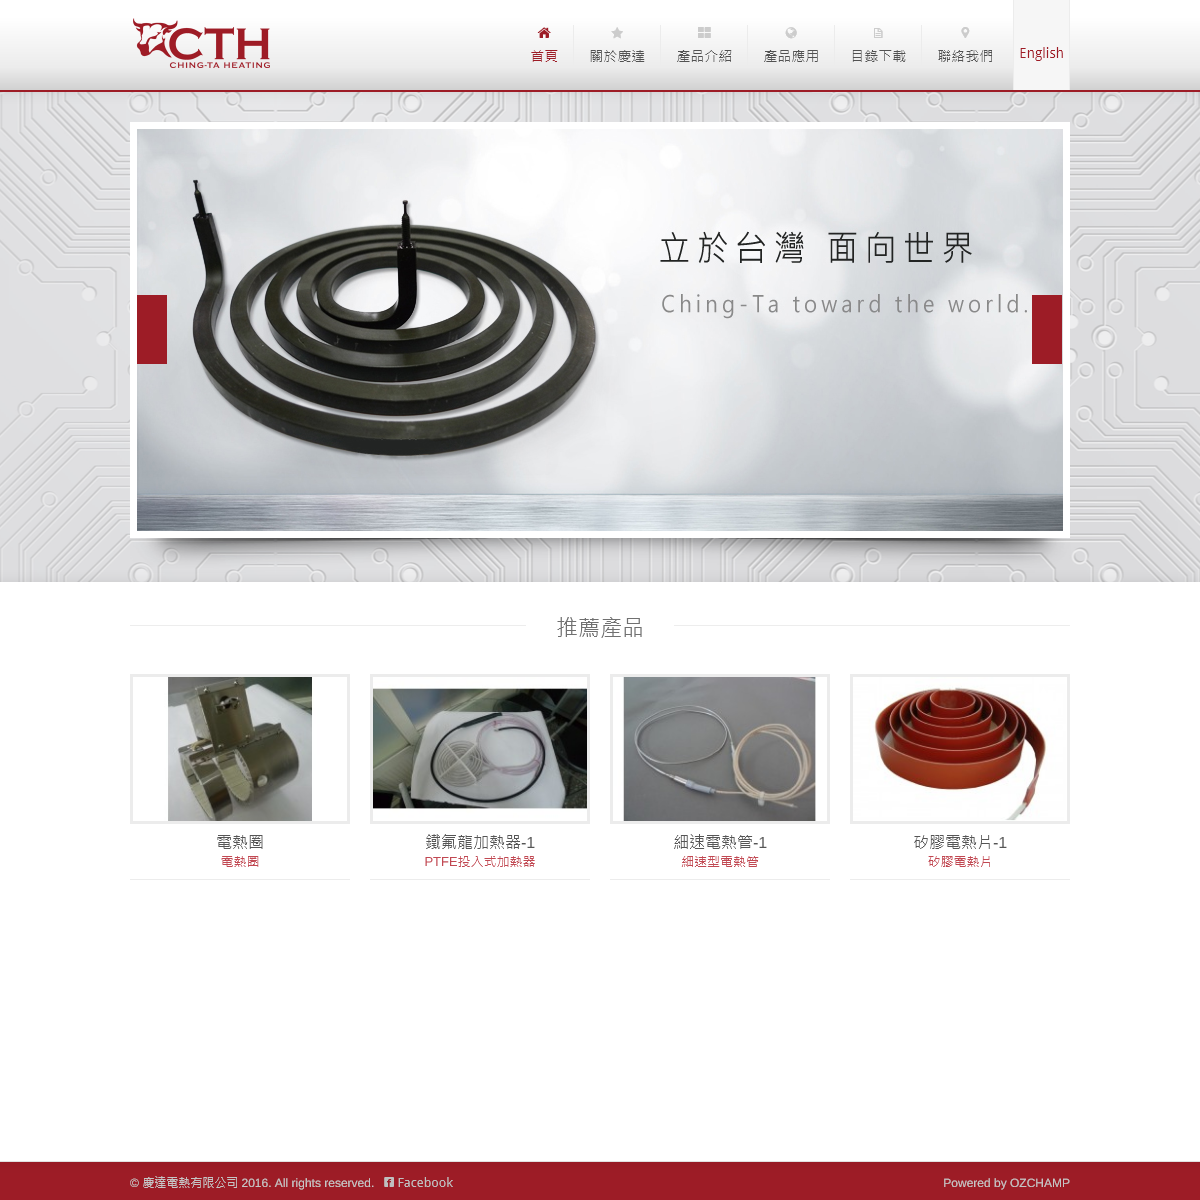 A complete backup of chintaheater.com